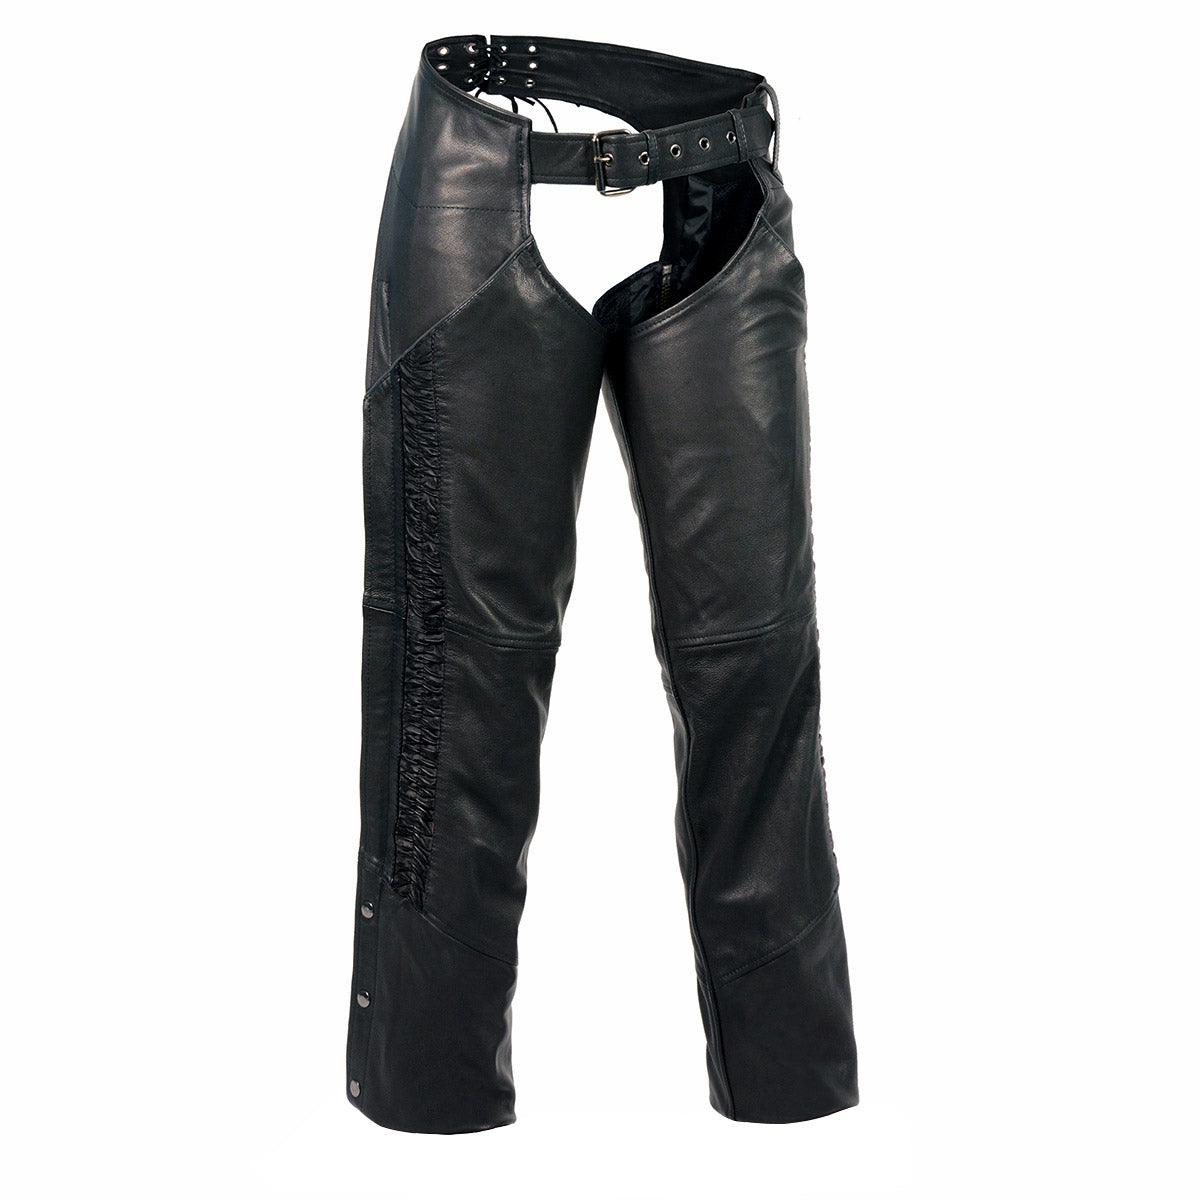 Milwaukee Leather Chaps for Women Black Naked Skin Black Crinkled Stripes- Reflective Trim Motorcycle Chap- MLL6500